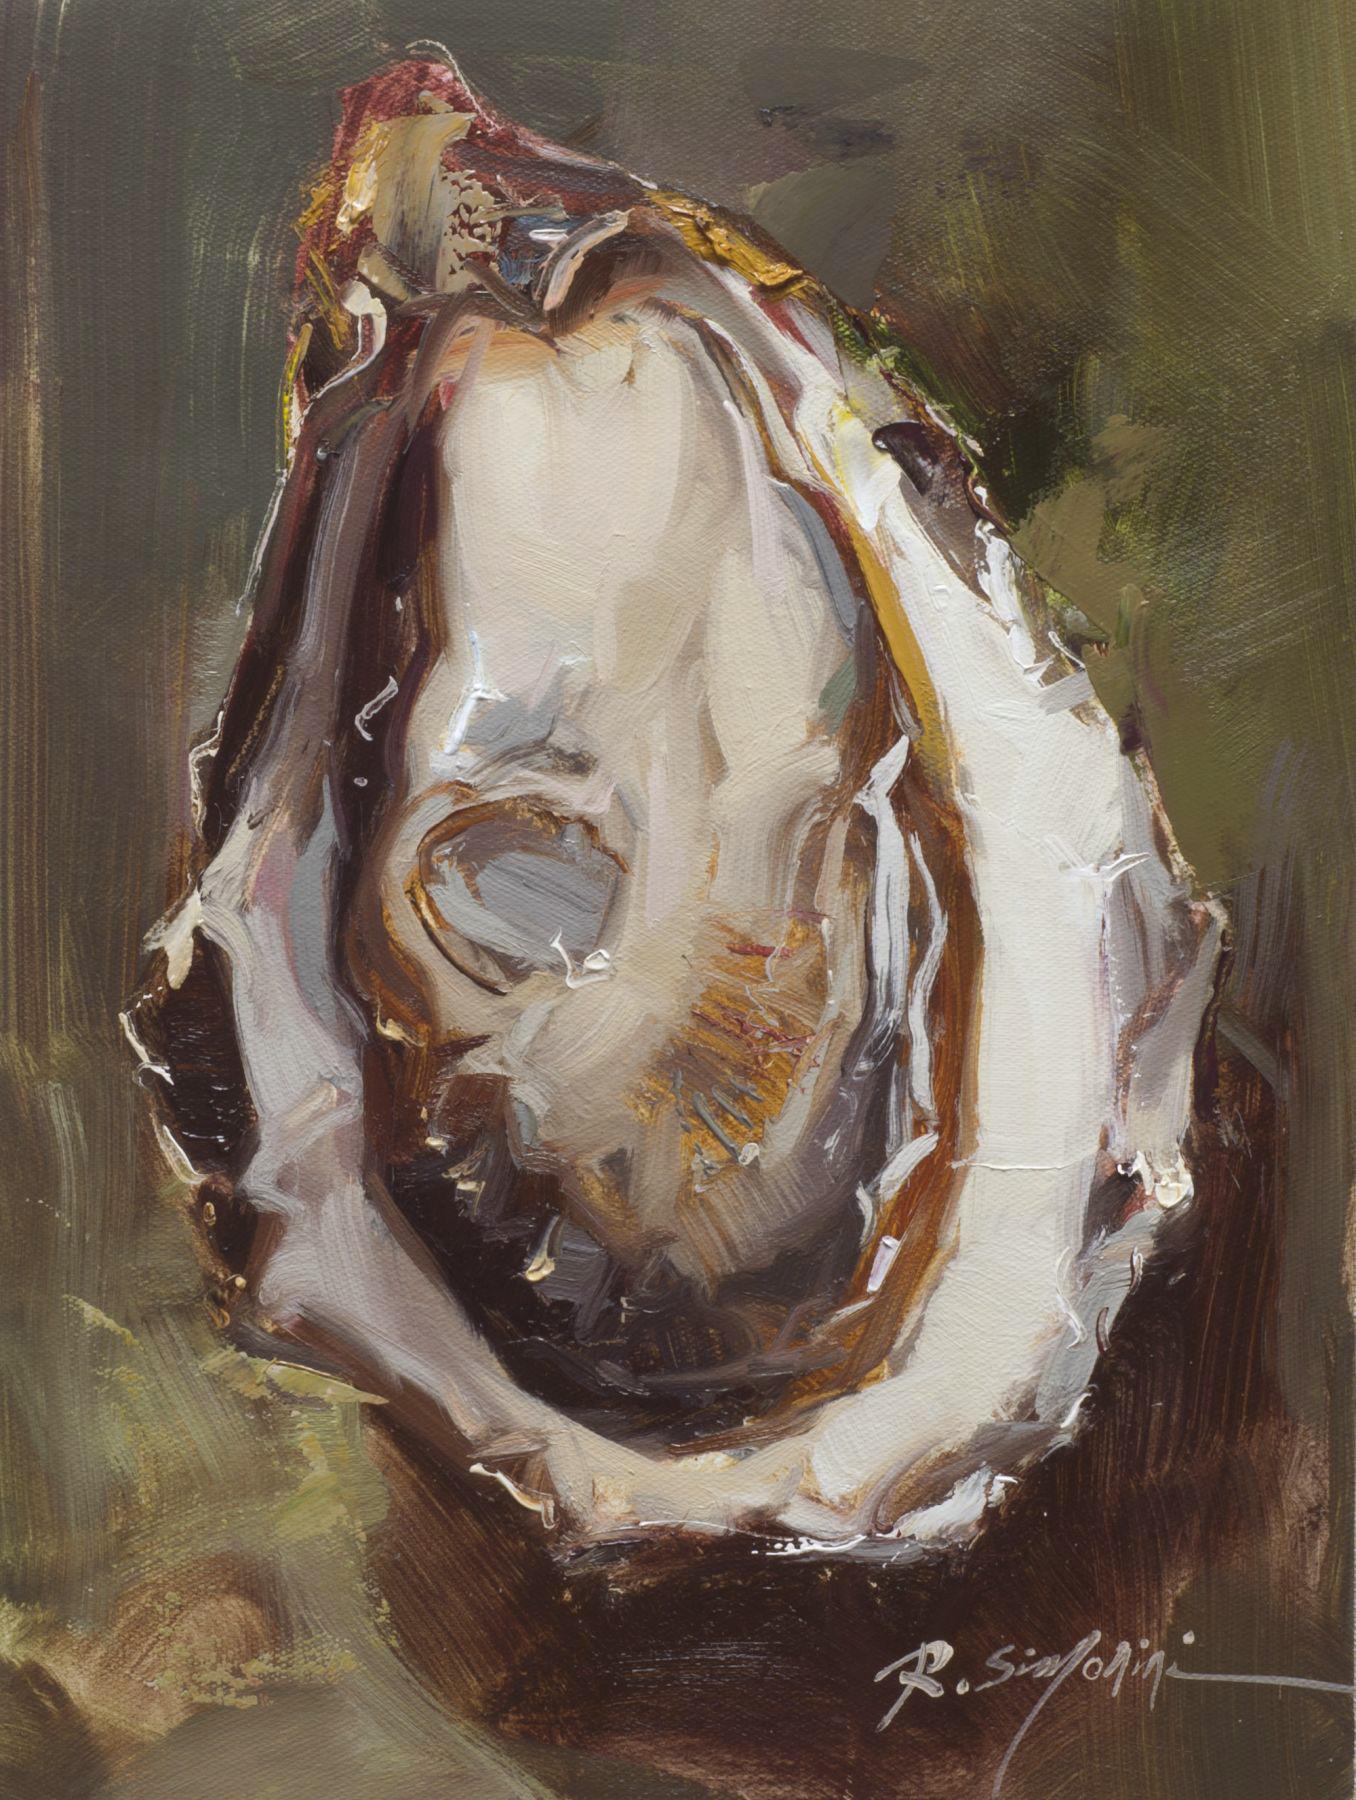 Ray Simonini, "Perfect Oyster" 16x12 Shell Impressionist Oil Painting on Canvas